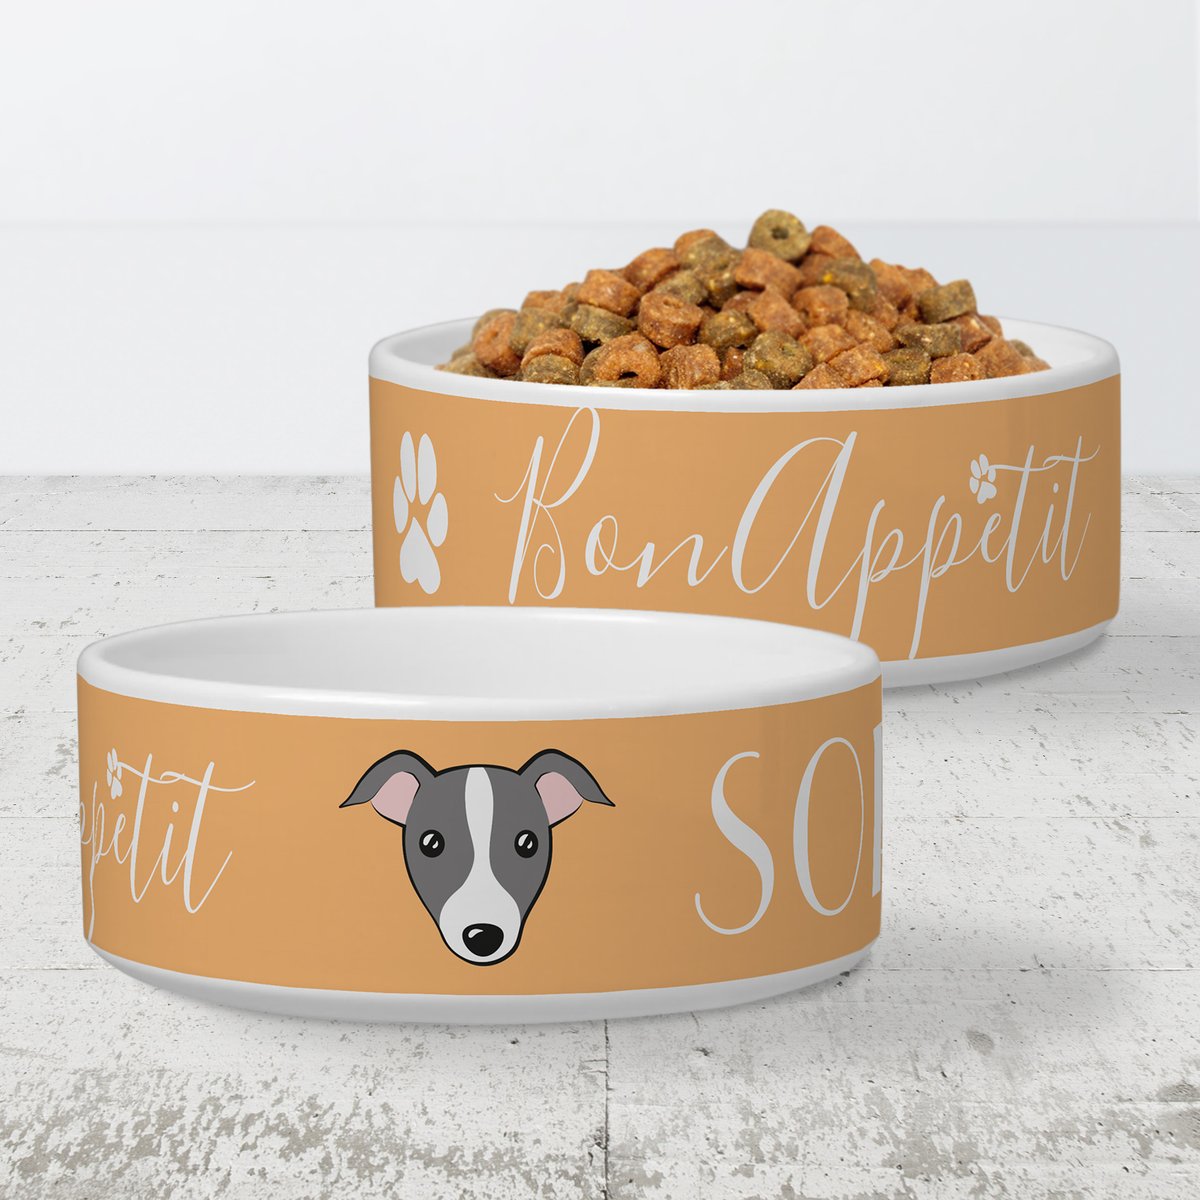 🐾 Find cute #personalized #PetSupplies in my #zazzle store >zazzle.com/store/edrawing… 

15% OFF Sitewide 🎁 #pets #petproducts #petaccessories #petIDtag #dogtag #petbowl #foodbowl #dogs #italiangreyhound #customized #cute #colorful #doglovers #dogmom #gifts #giftideas #zazzlemade